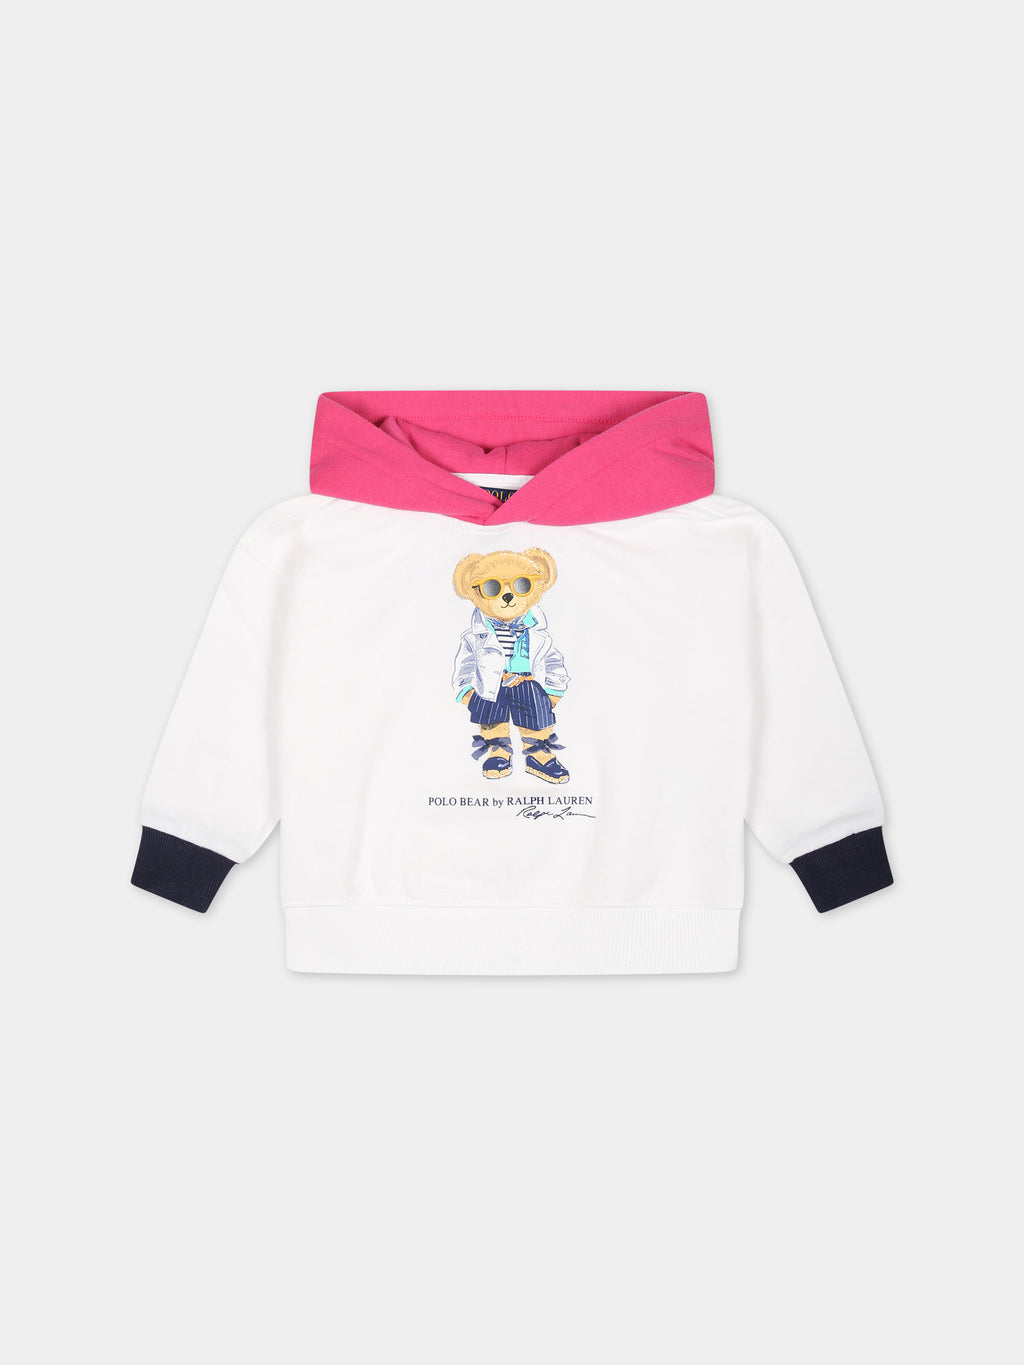 White sweatshirt for baby girl with Polo Bear